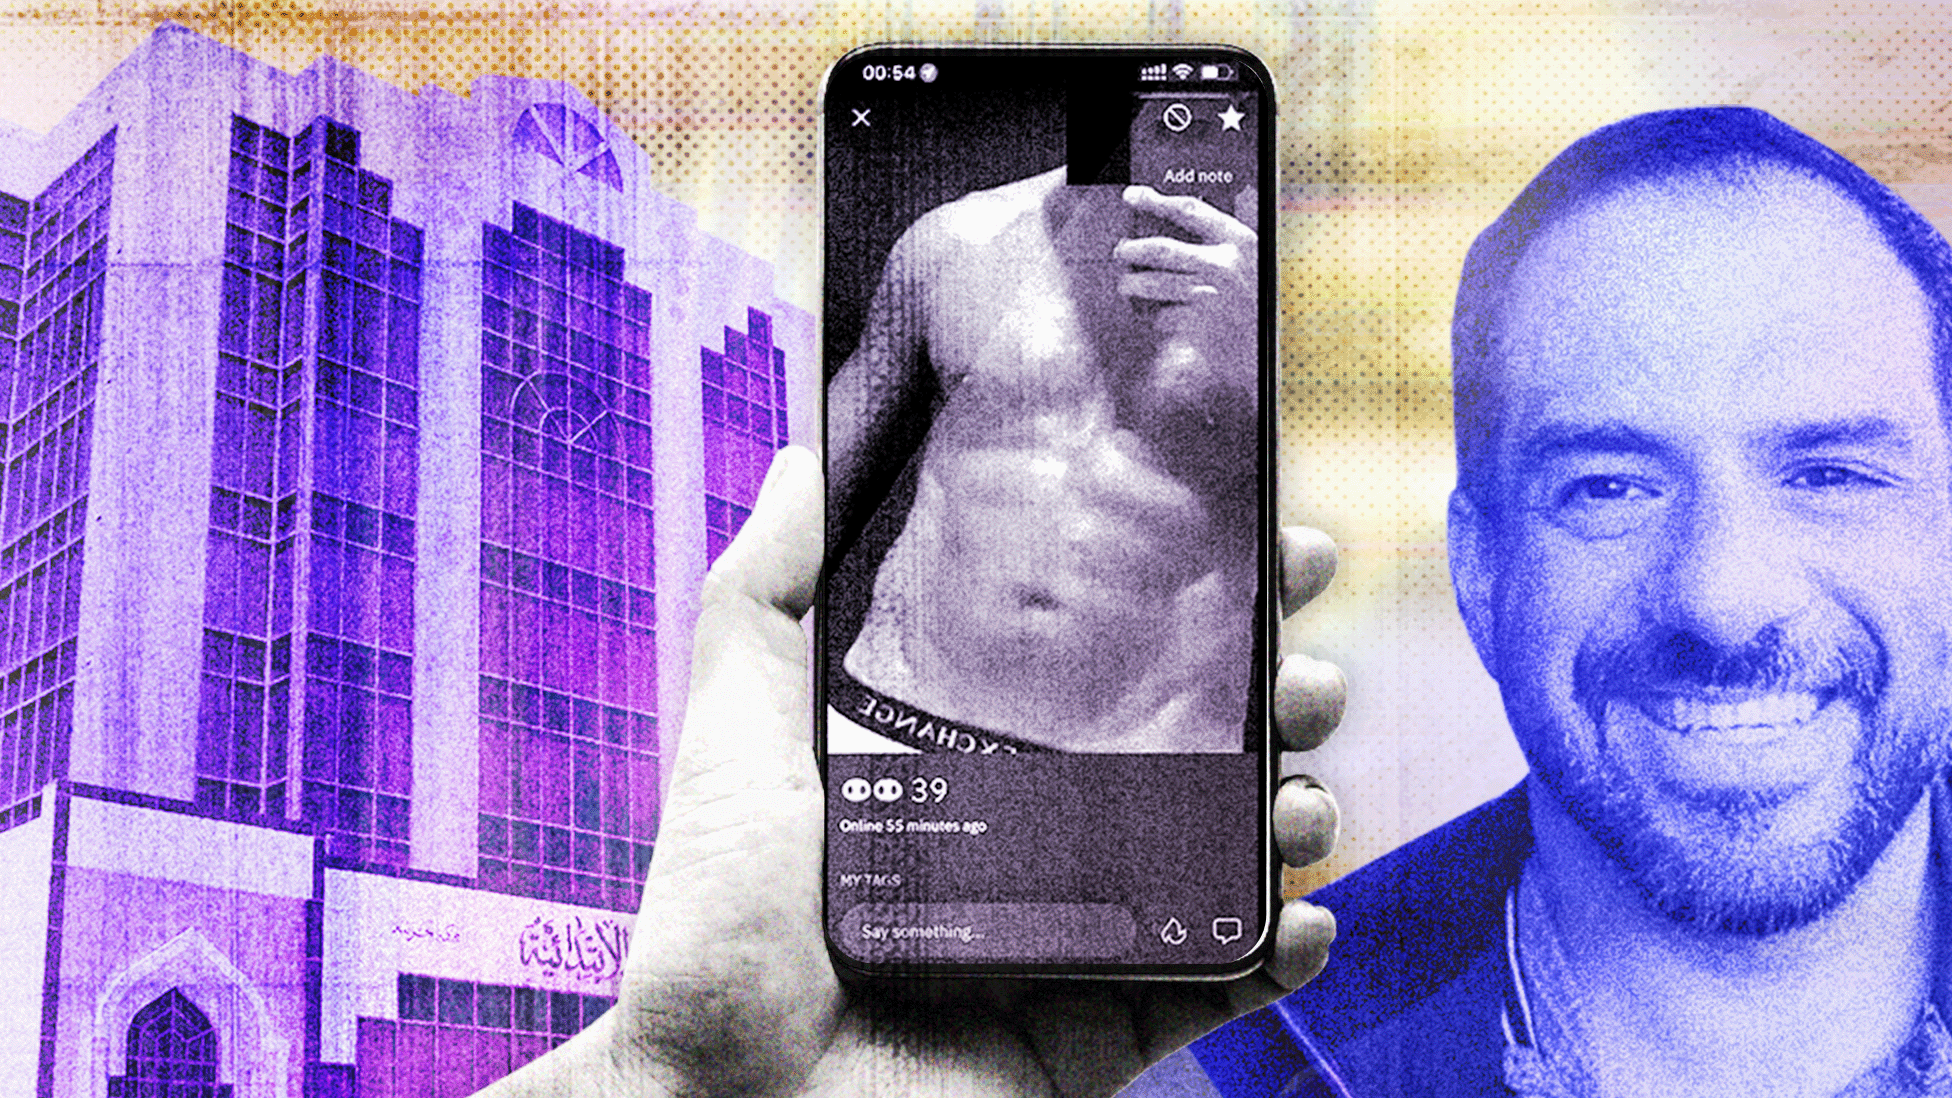 Composite picture of Doha courthouse, phone with gay dating app Grindr displayed, and Manuel Guerrero Avina